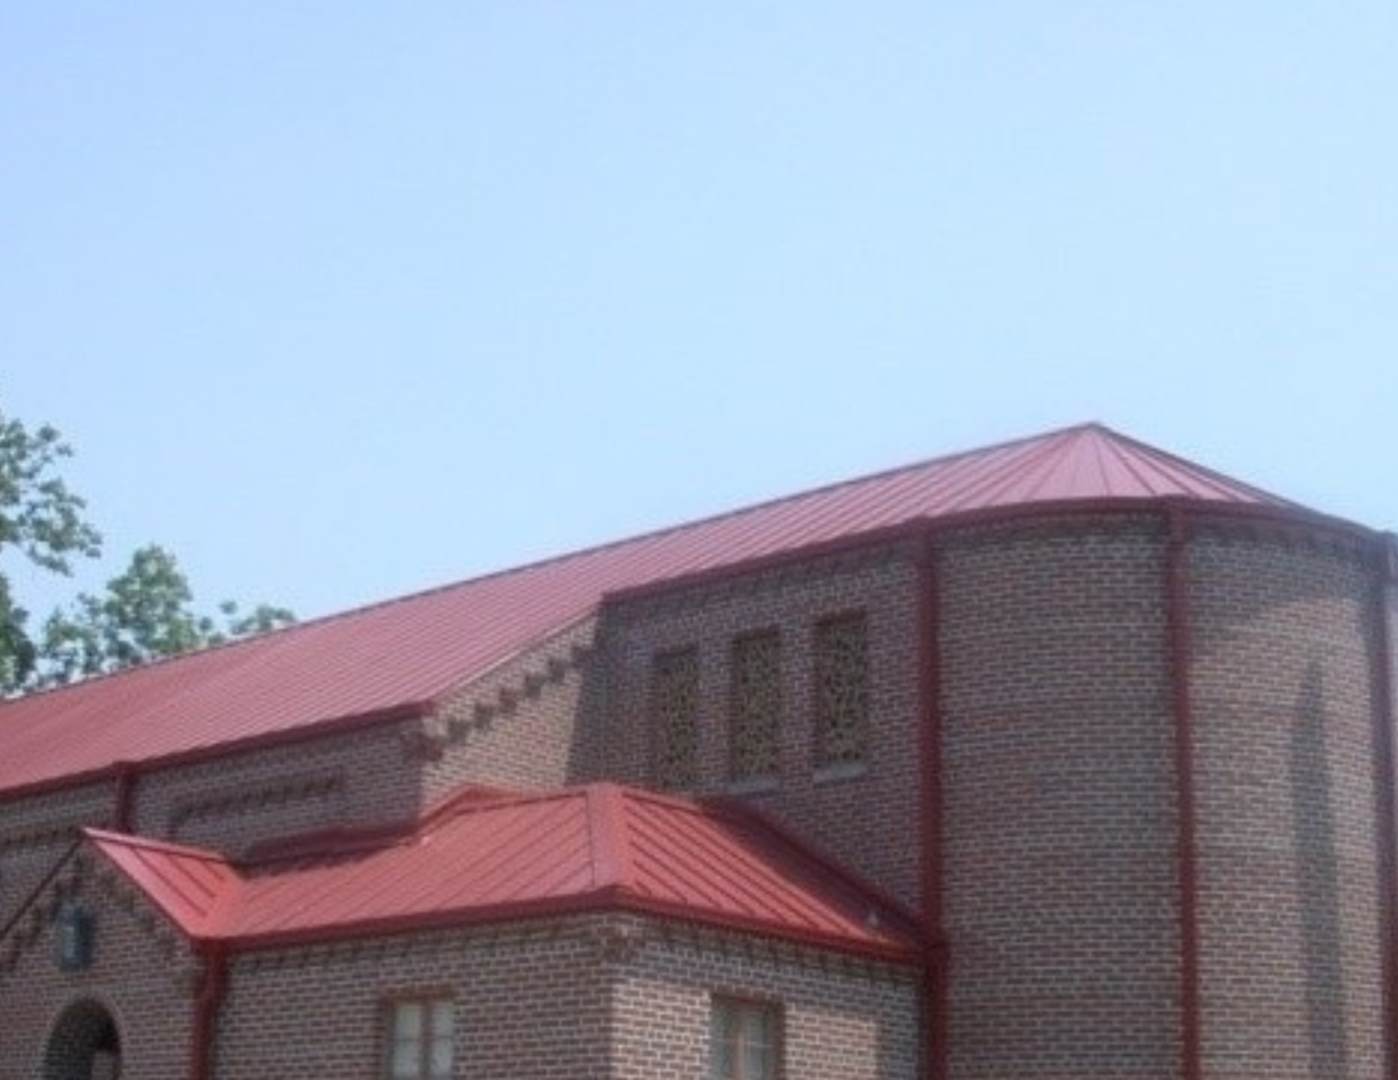 A building with red roof and windows